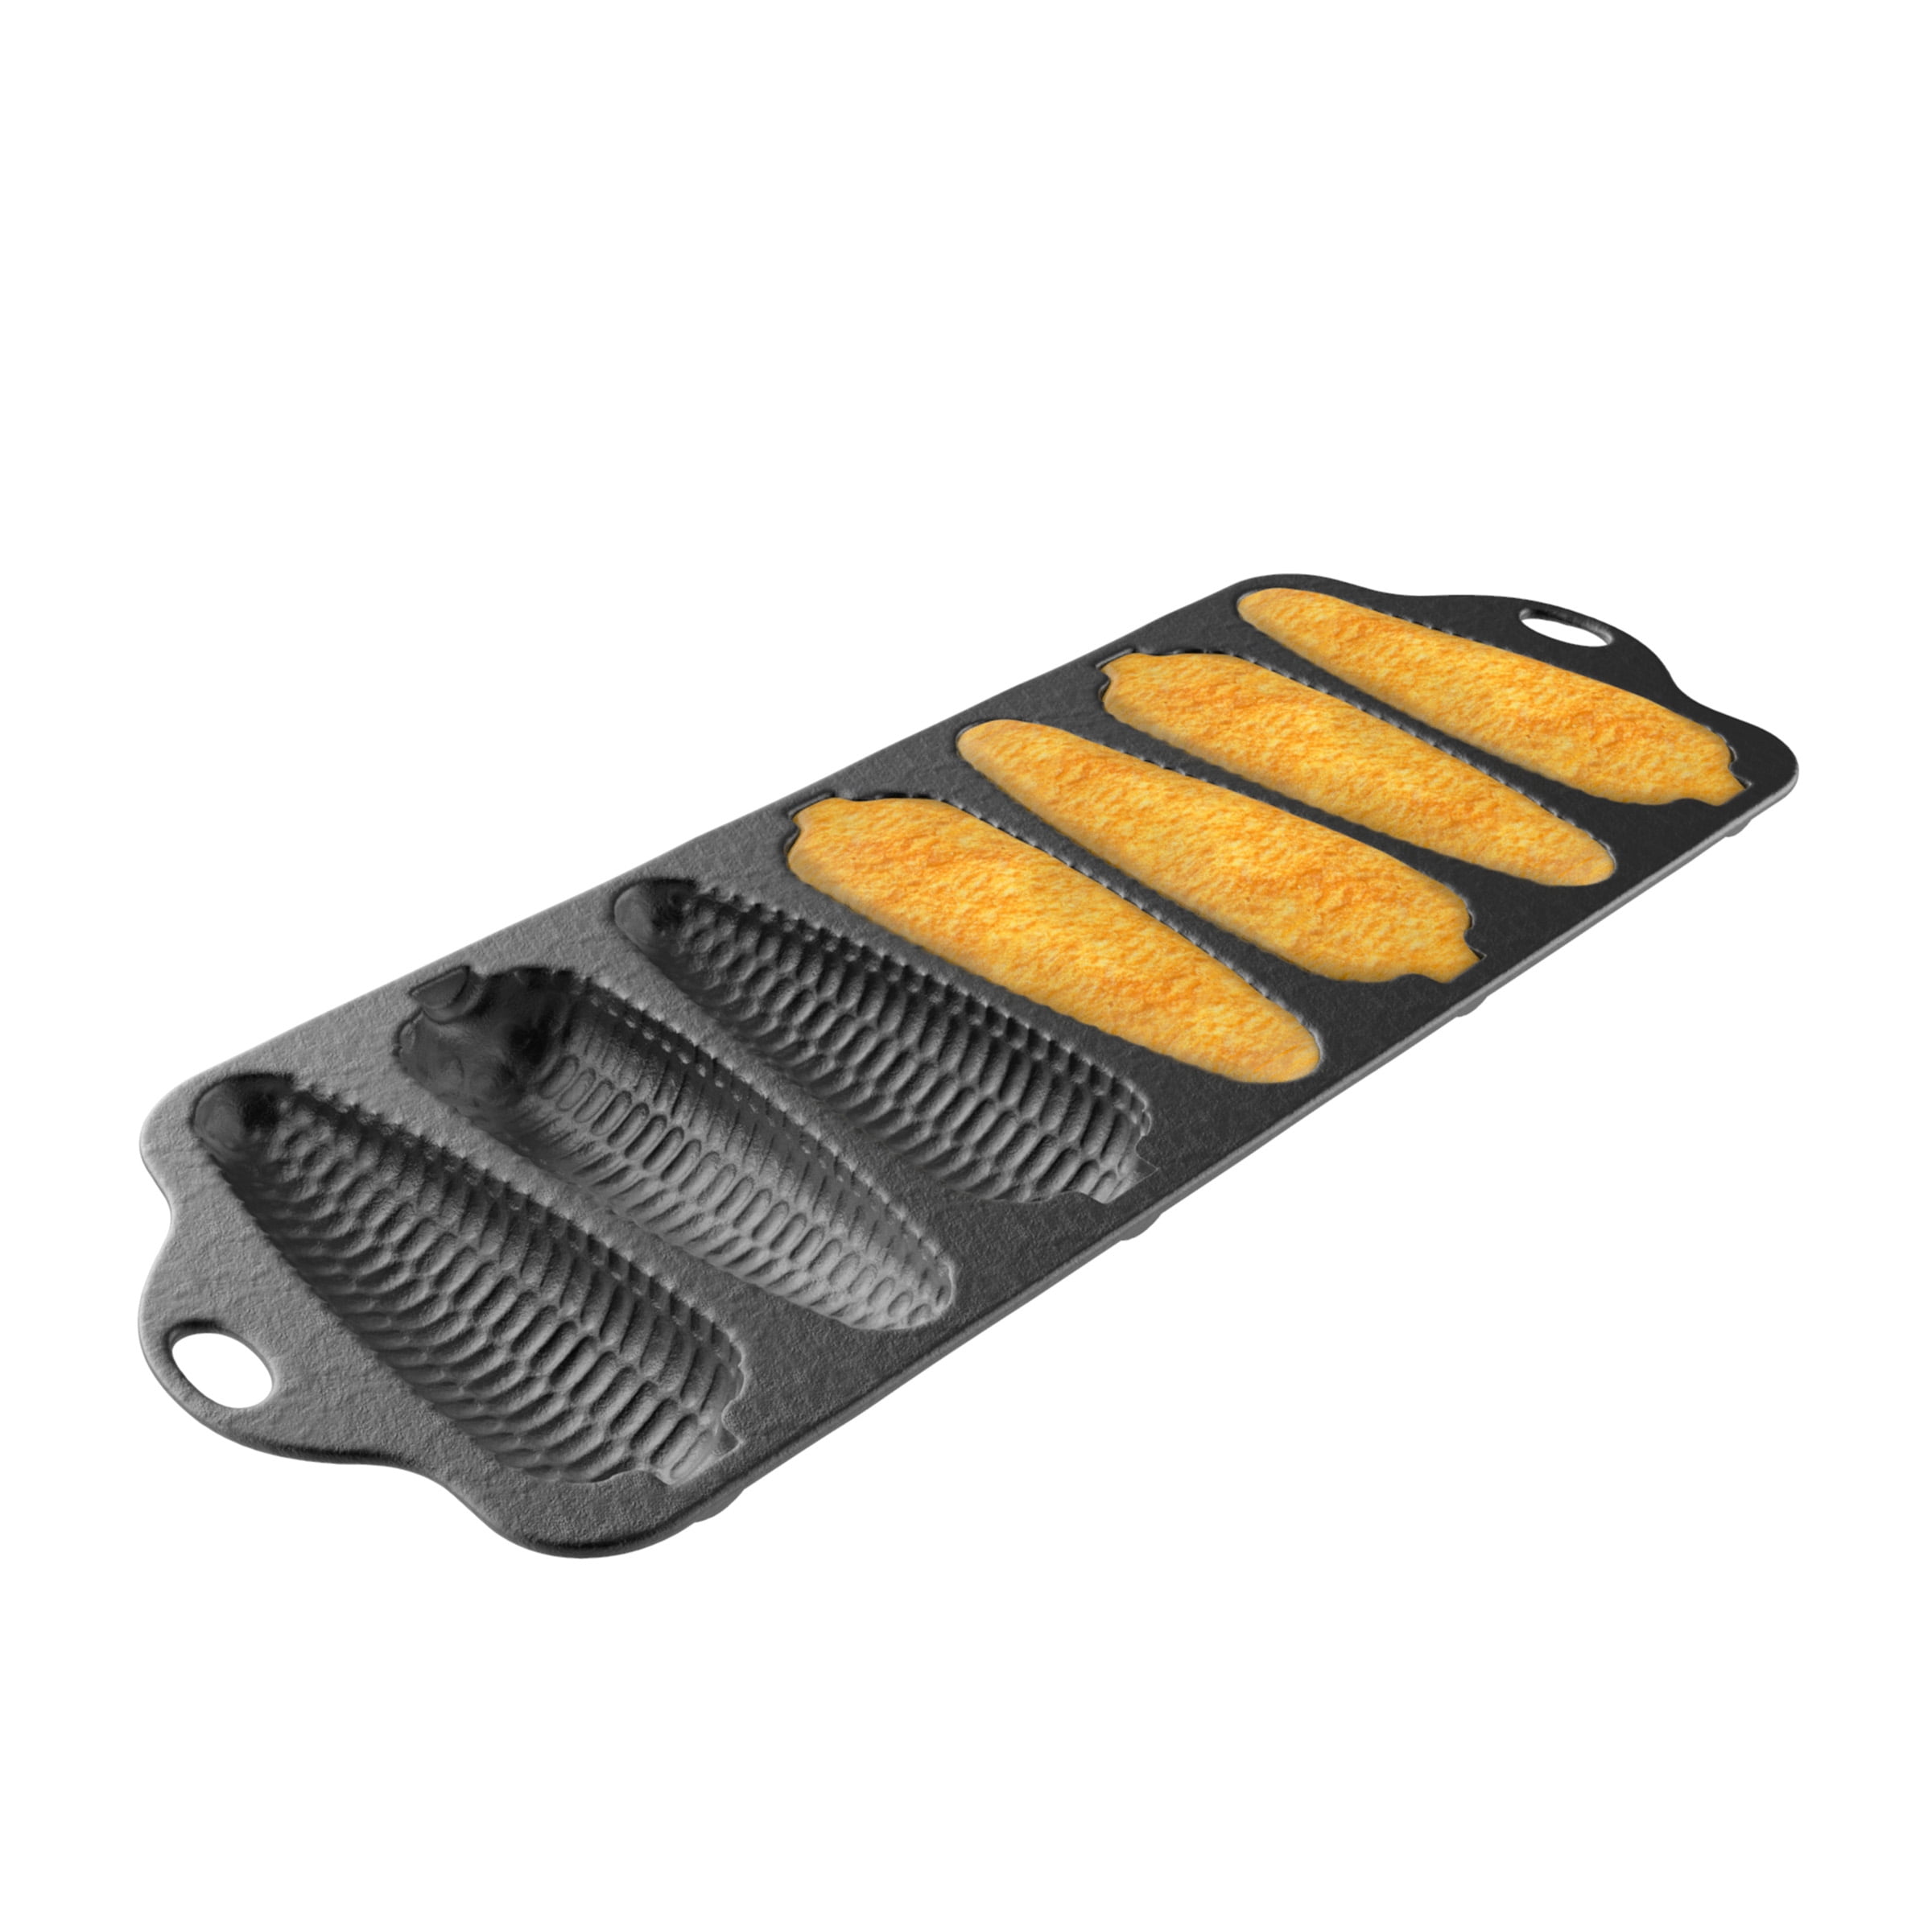 Cast Iron Cornbread Pan-Pre-Seasoned Bakeware with 7 Corncob  Sticks-Compatible with Oven, Stovetop, Induction, Grill, and Campfires by  Classic Cuisine 